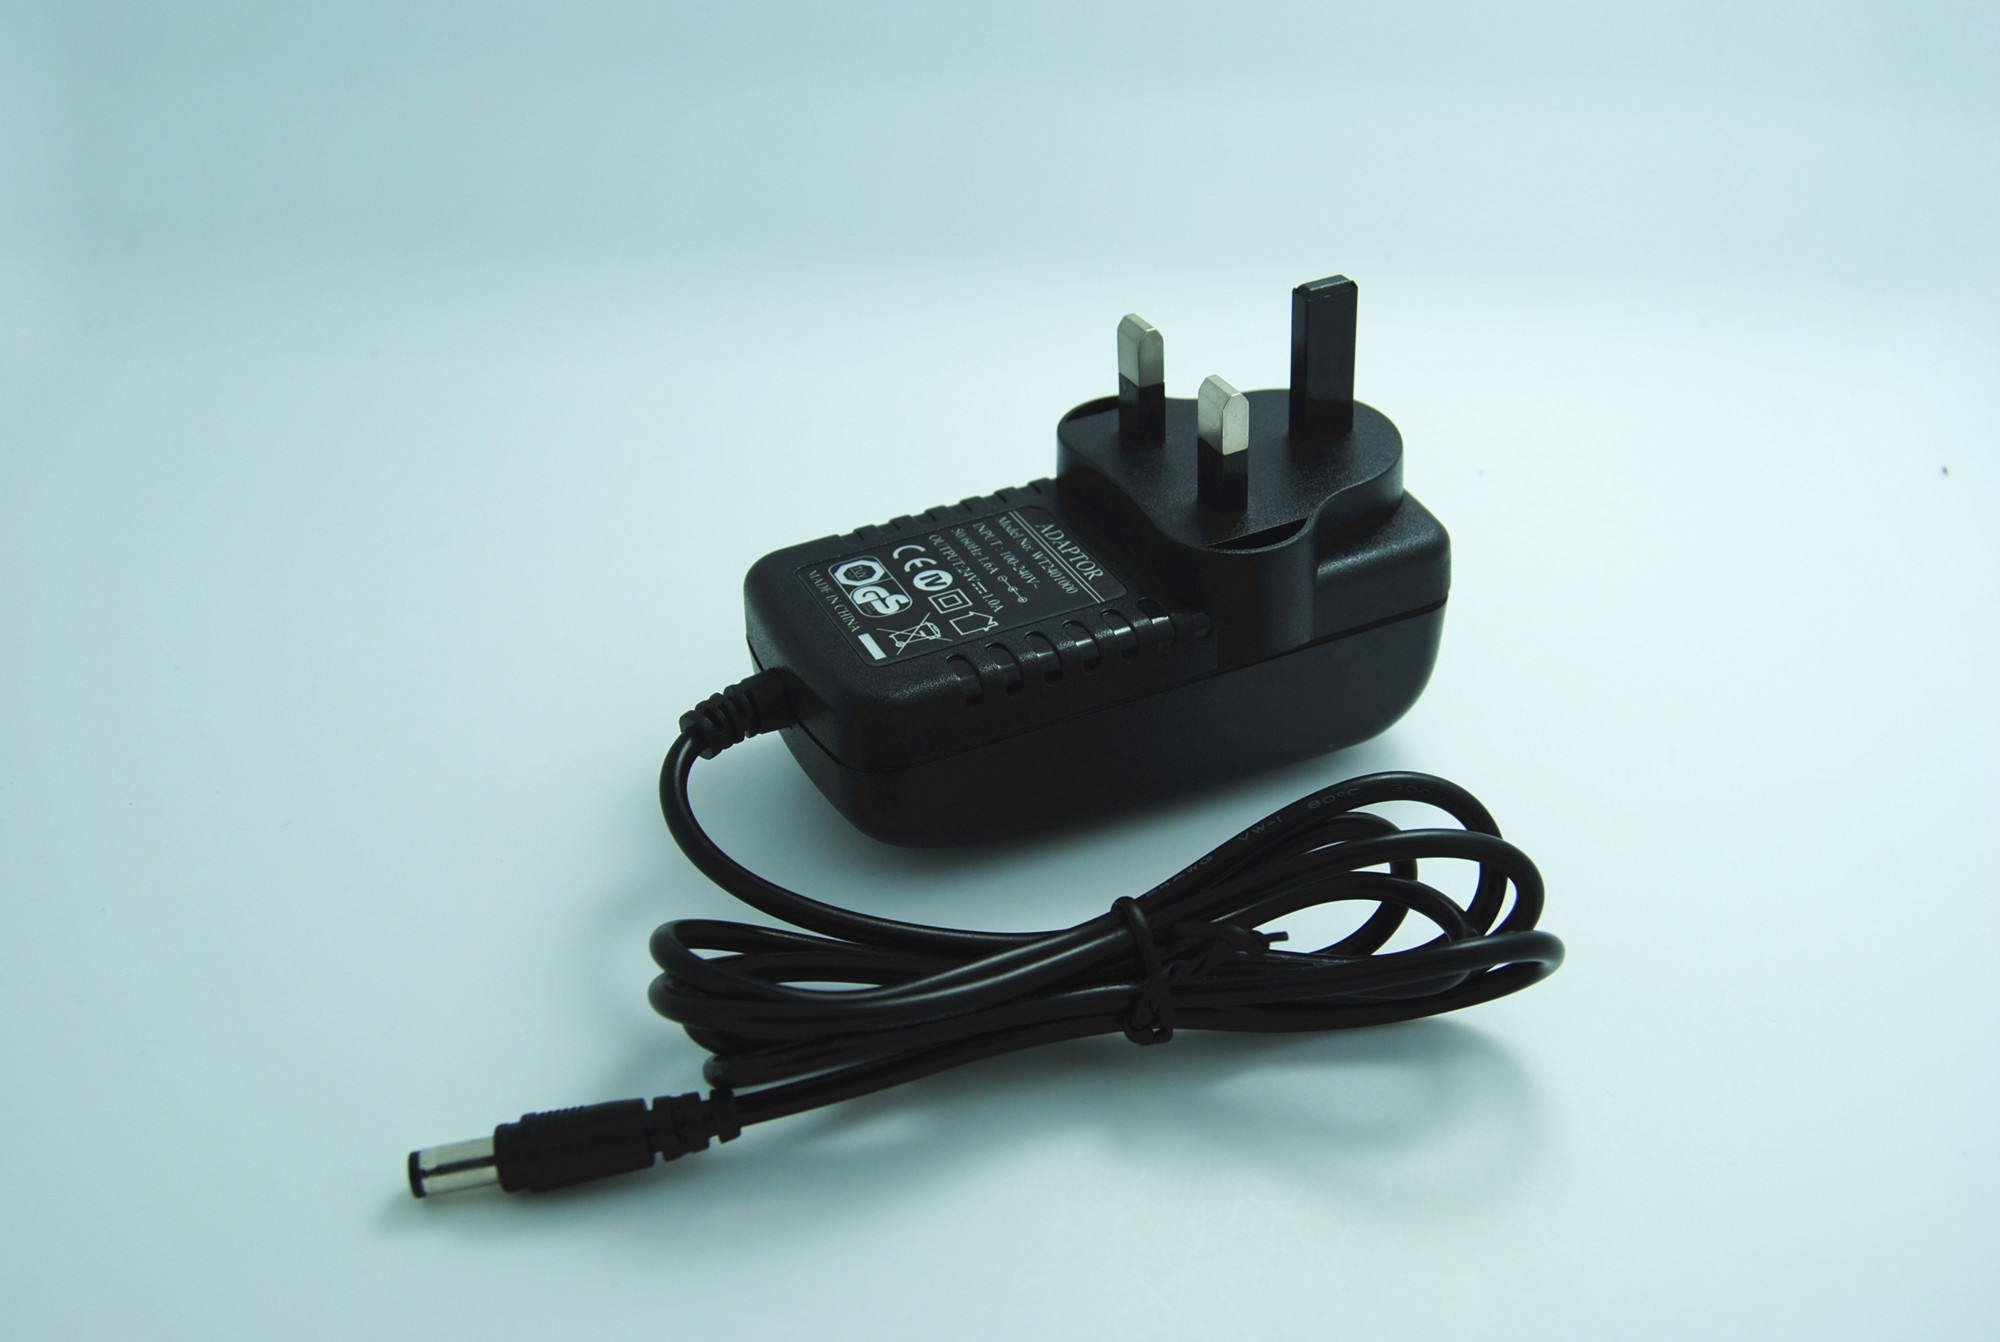 CE / FCC / RoHS Wall Mount Power Adapter 